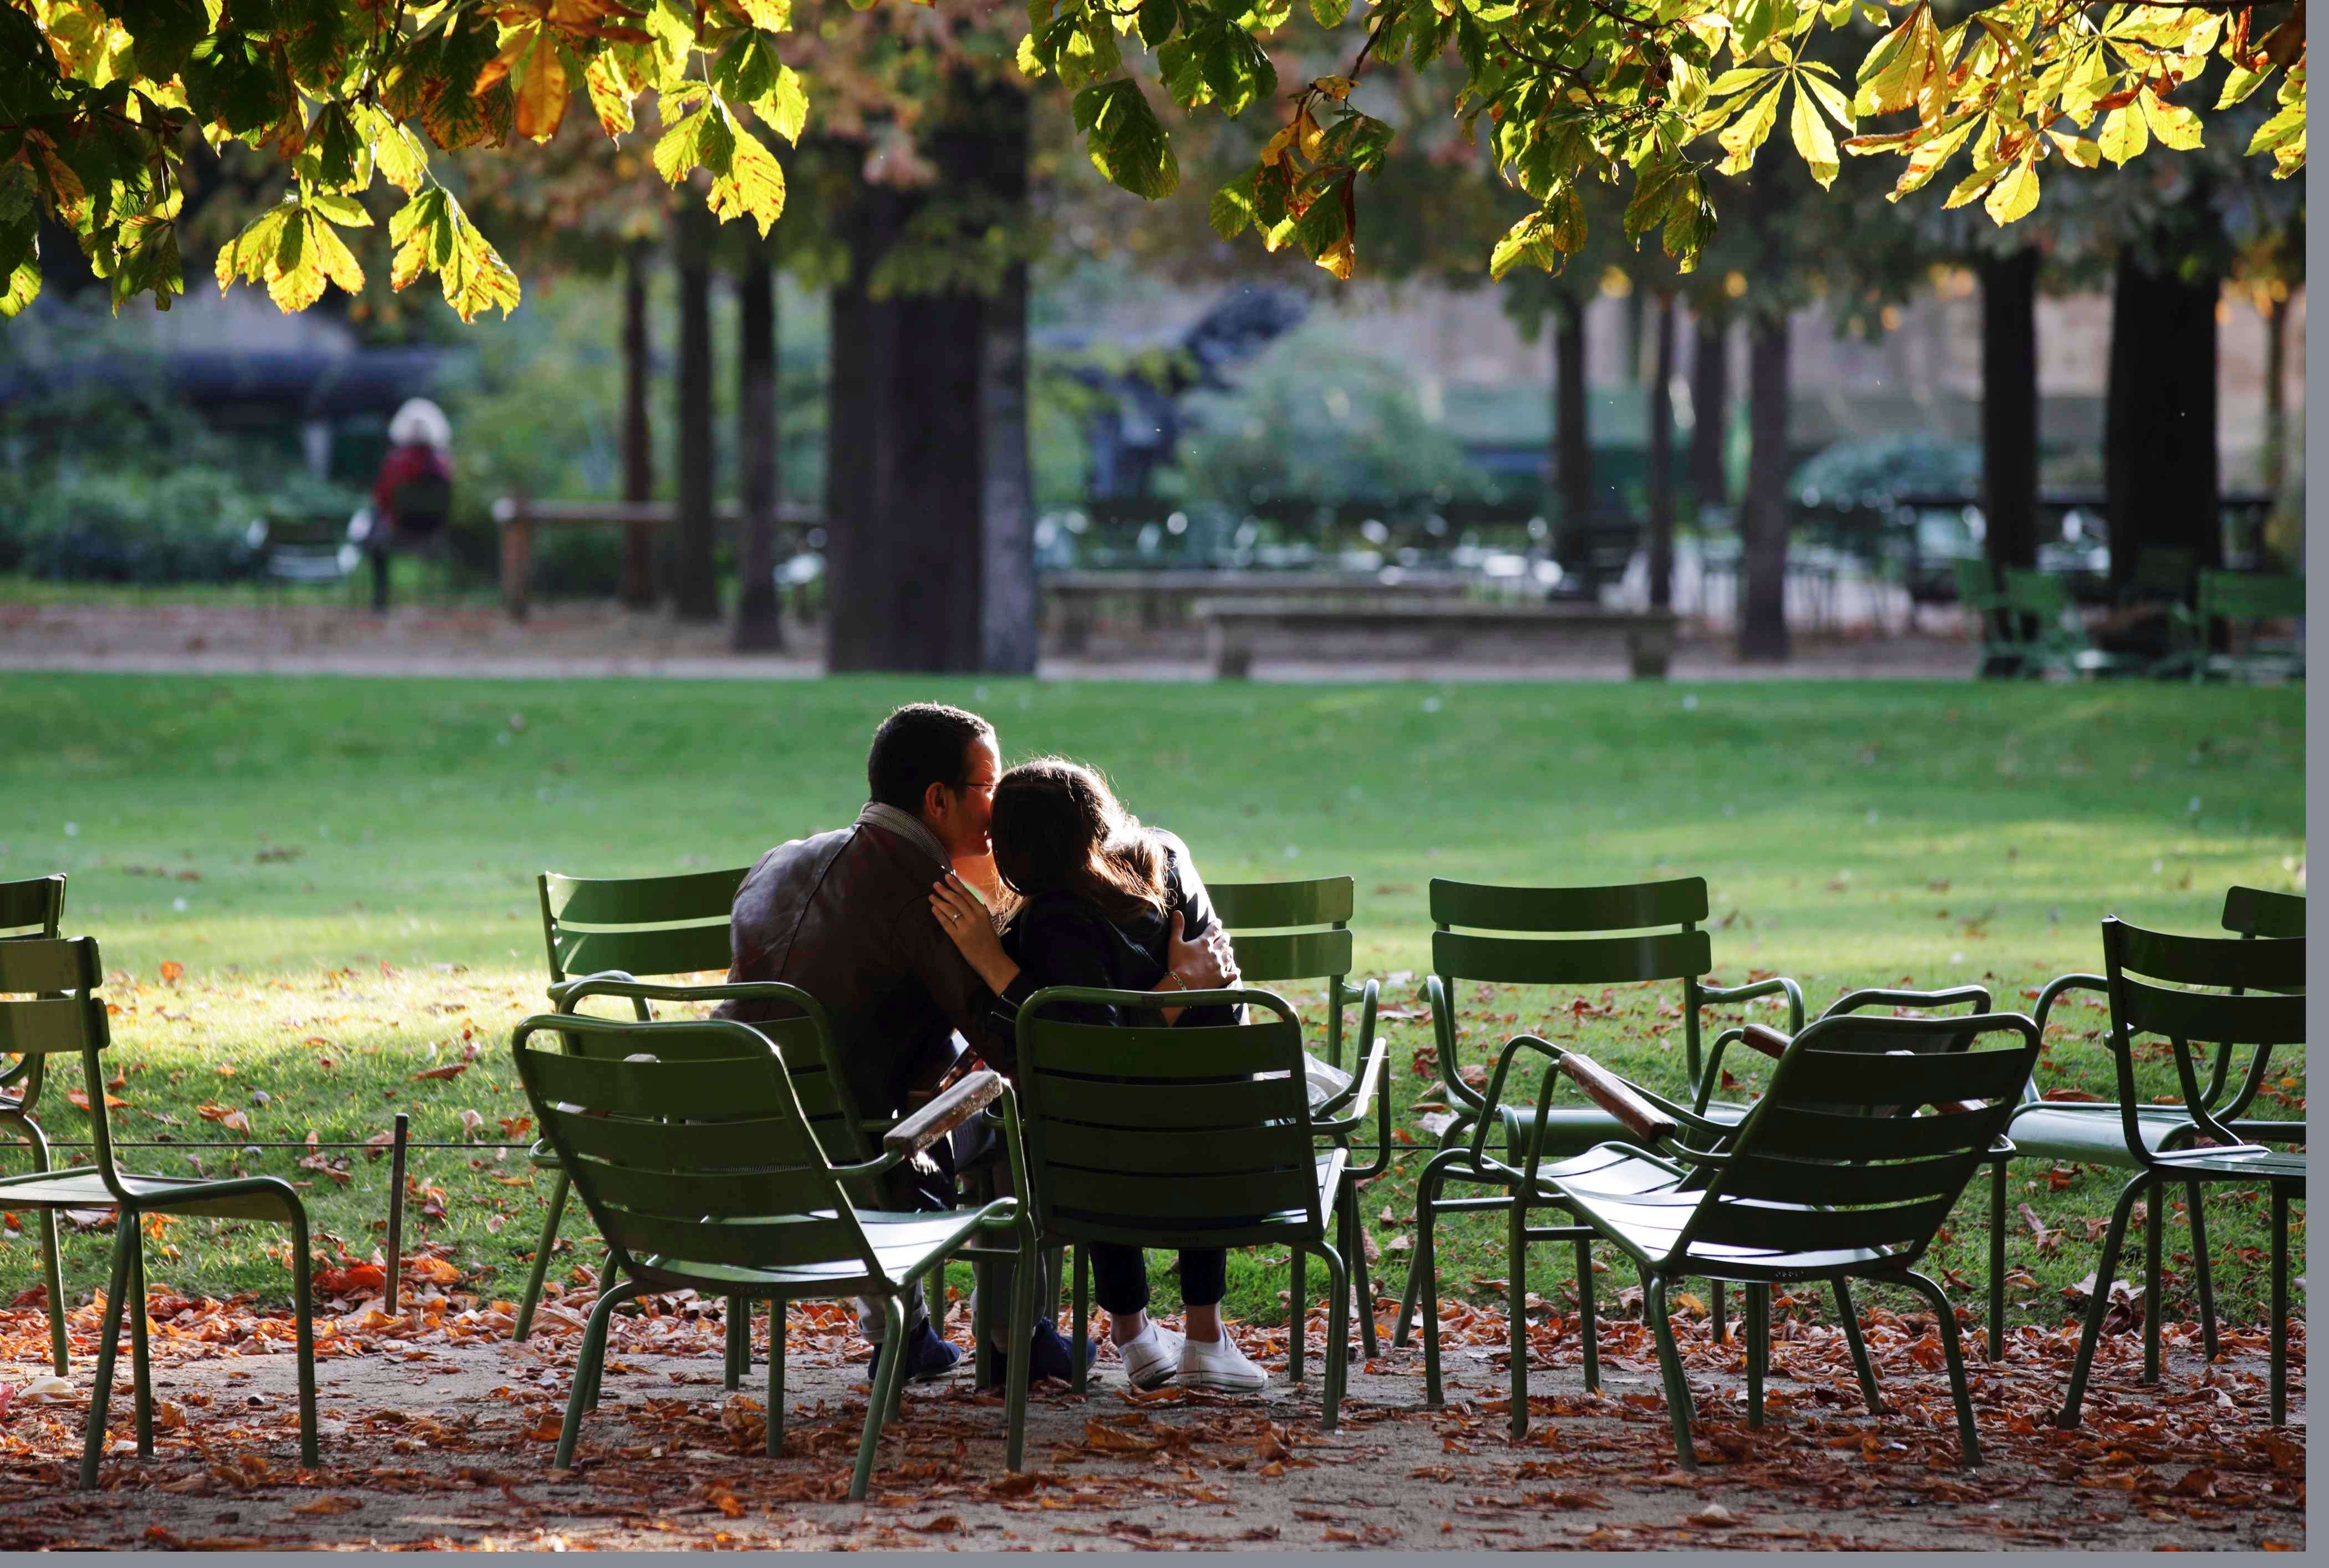 A couple kiss under trees with leaves that display autumn colors and mark the change of the season at the Tuileries Gardens in Paris, France